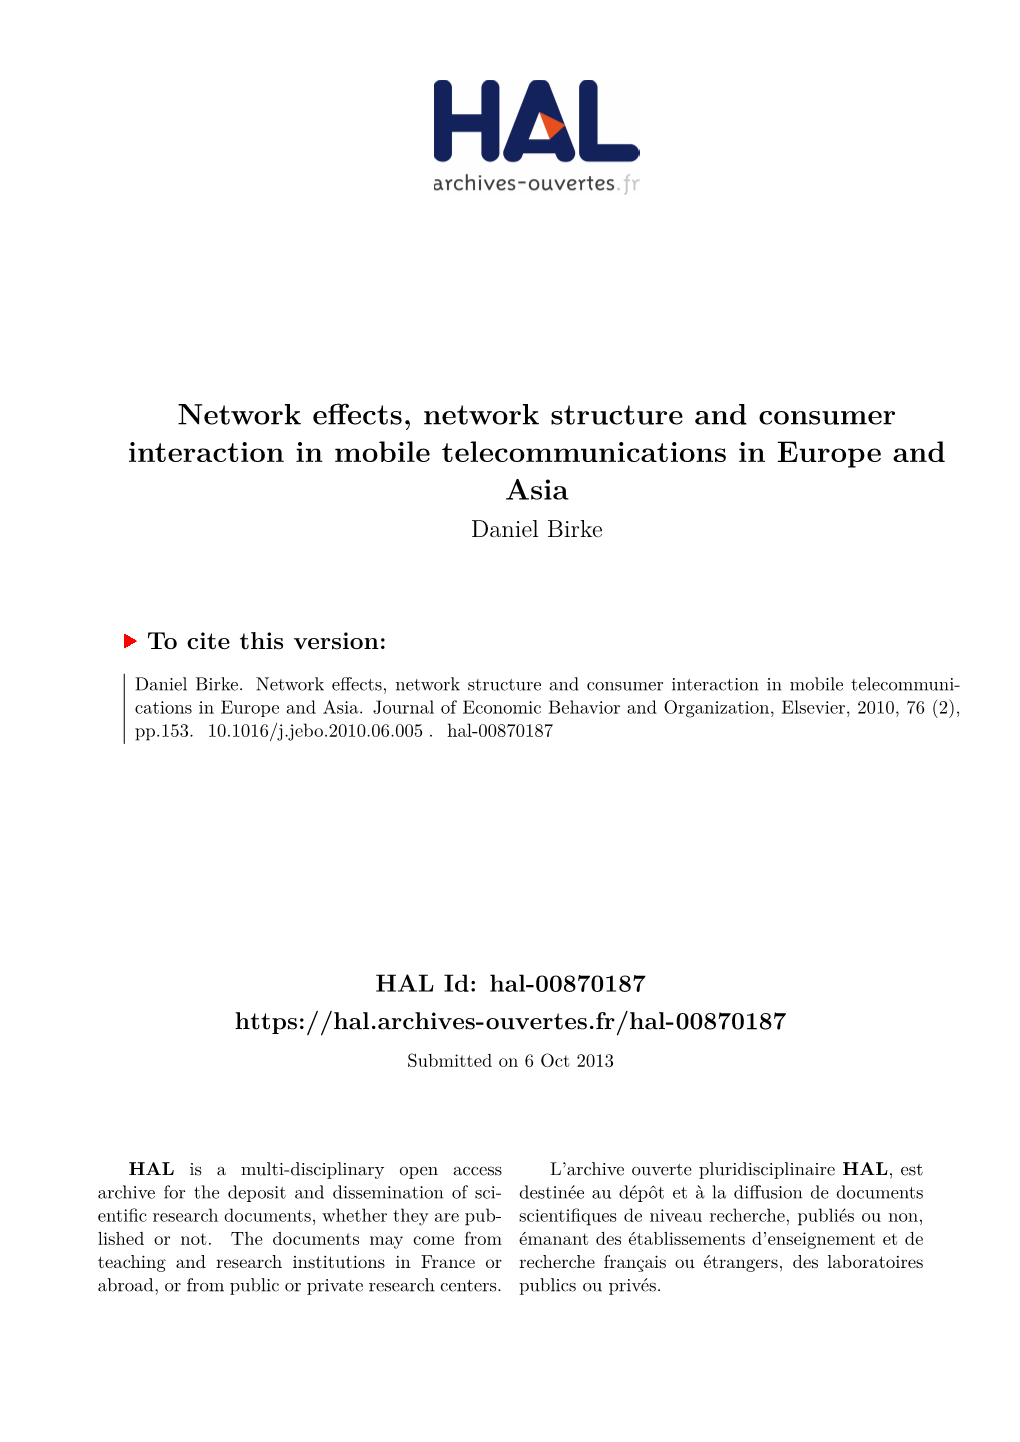 Network Effects, Network Structure and Consumer Interaction in Mobile Telecommunications in Europe and Asia Daniel Birke